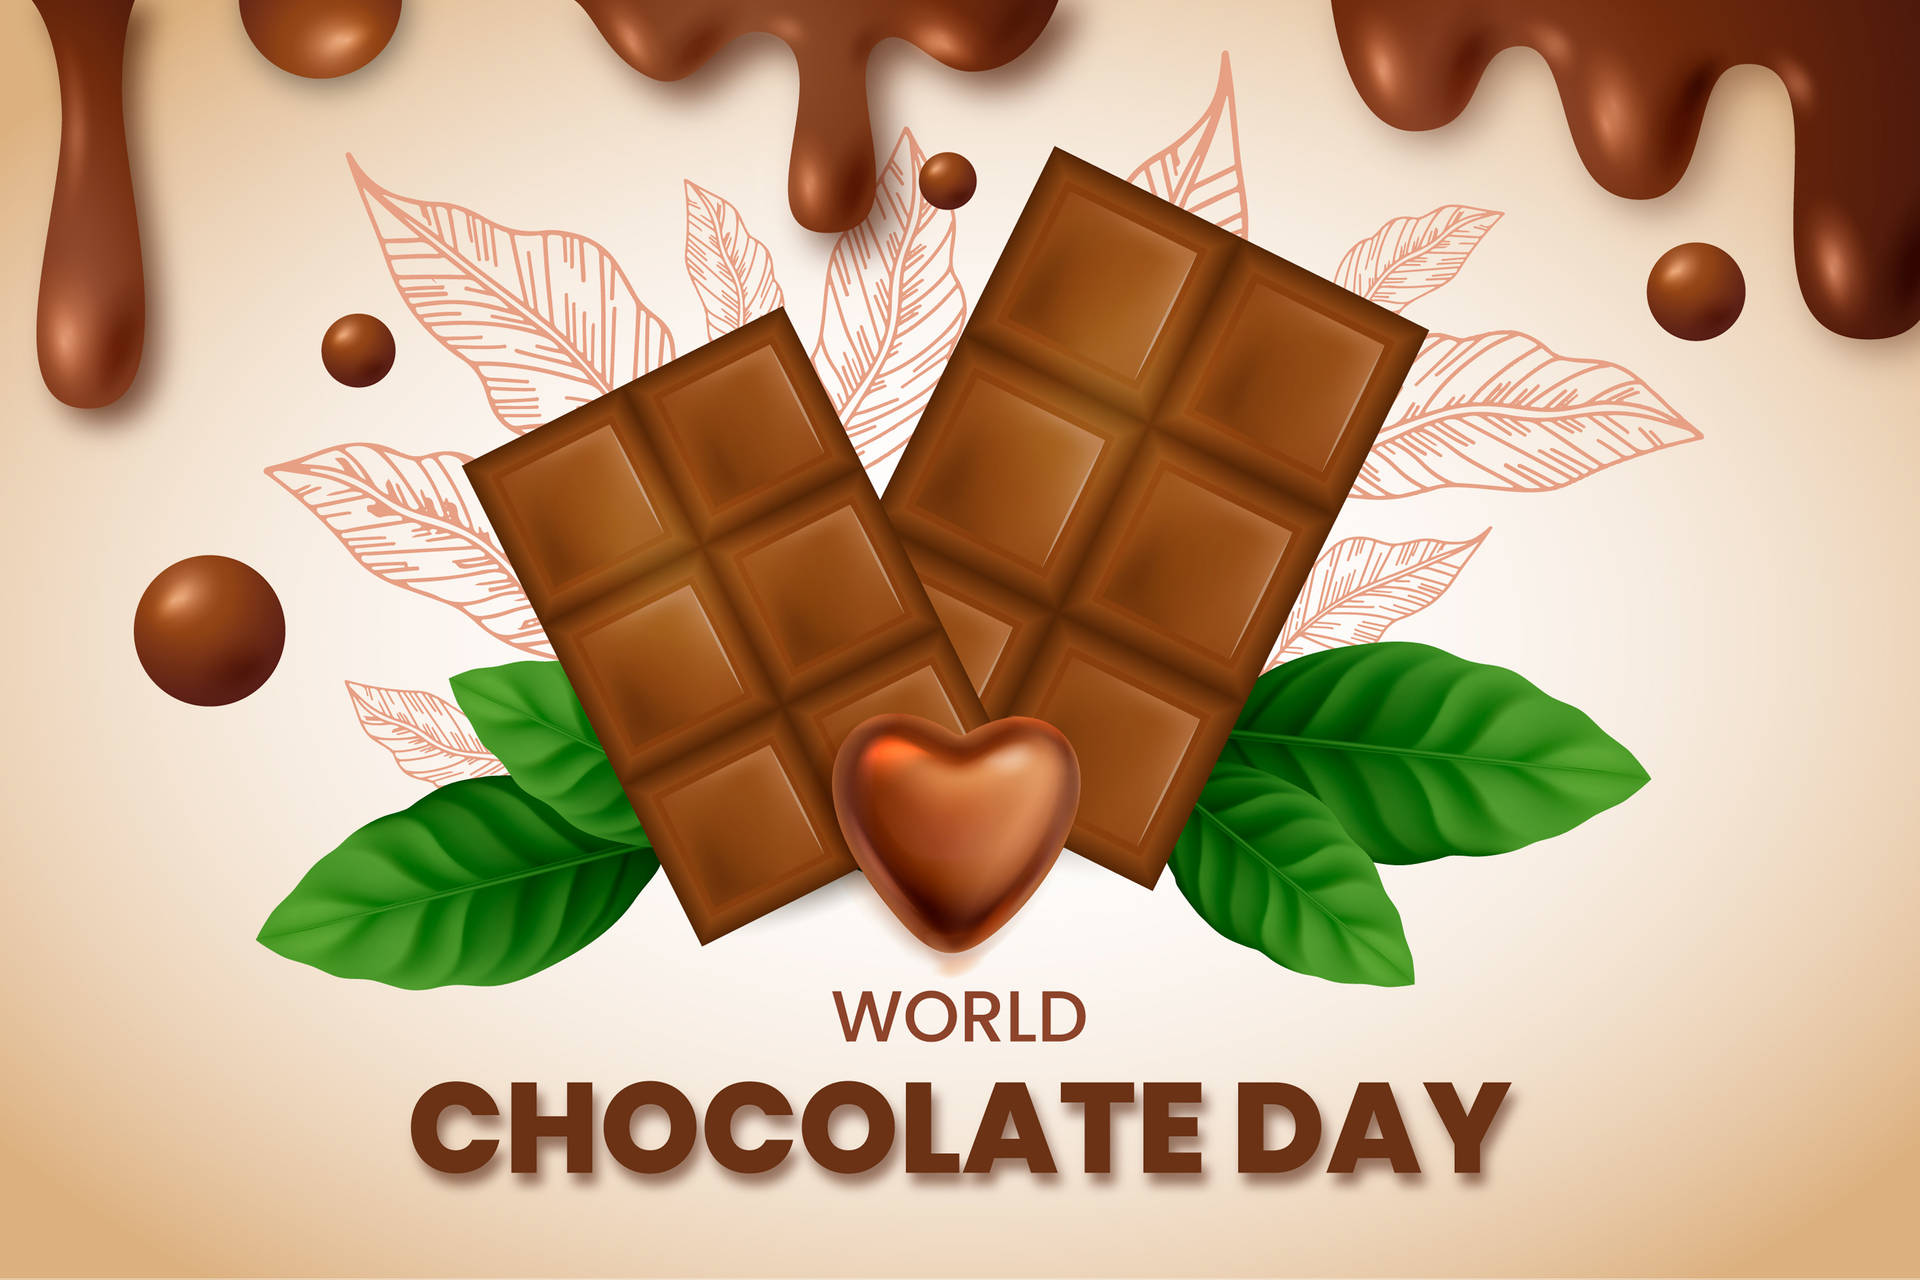 Chocolate Day Background Wallpaper